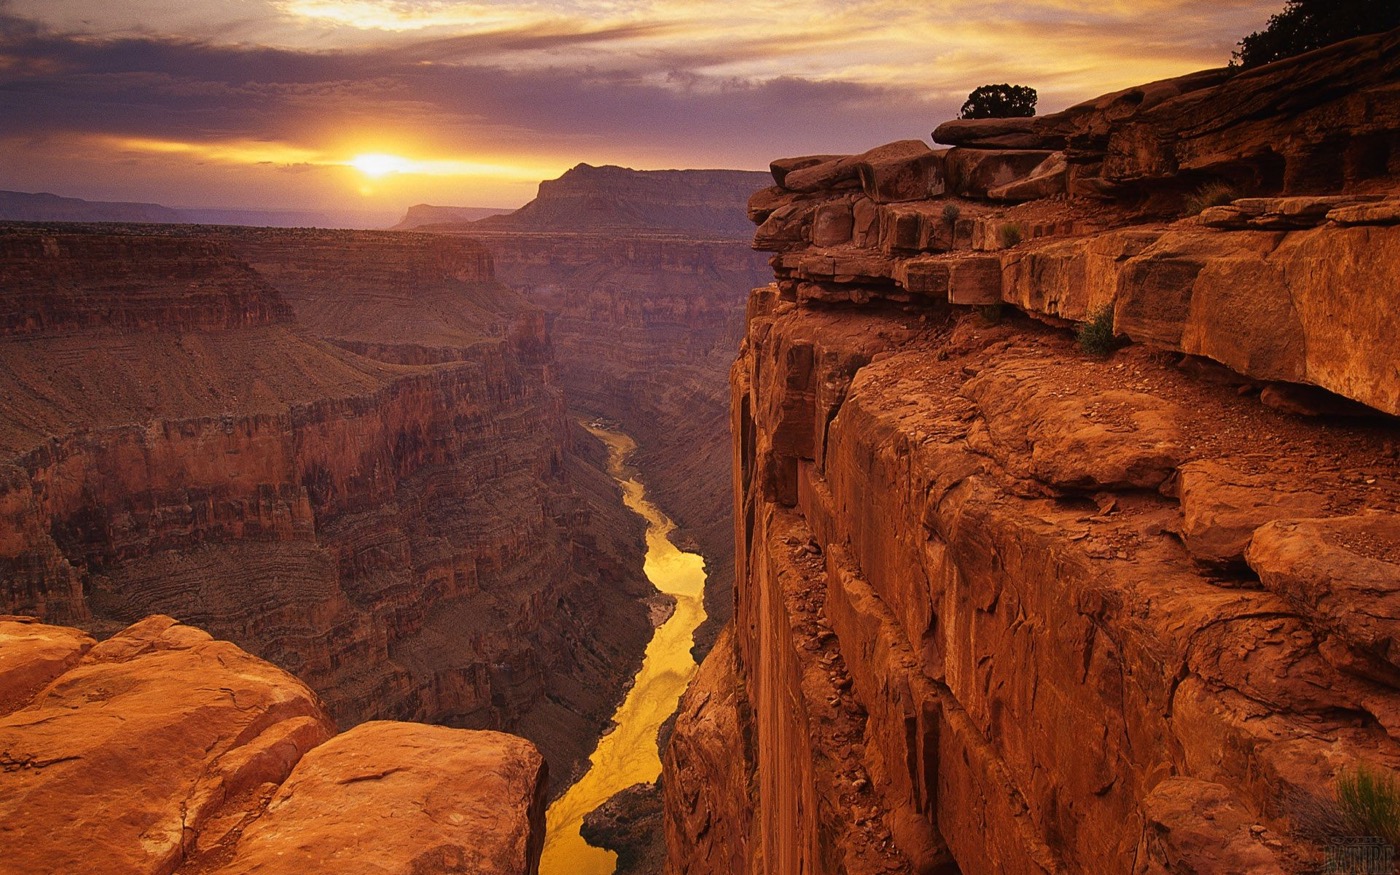 a sunset view of the Grand Canyon